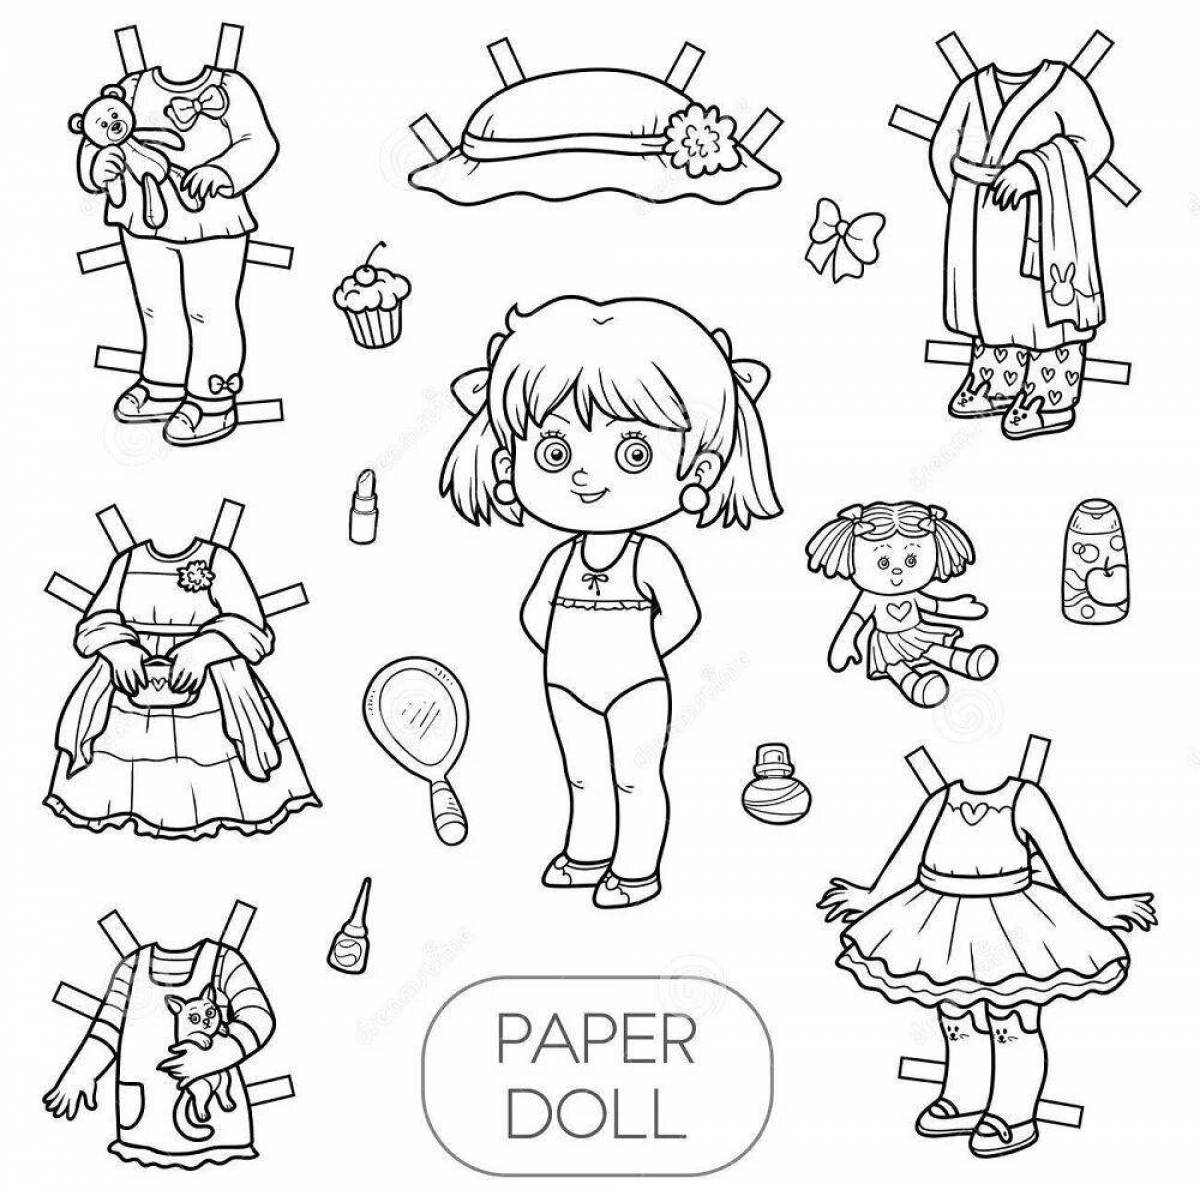 Funny doll with things